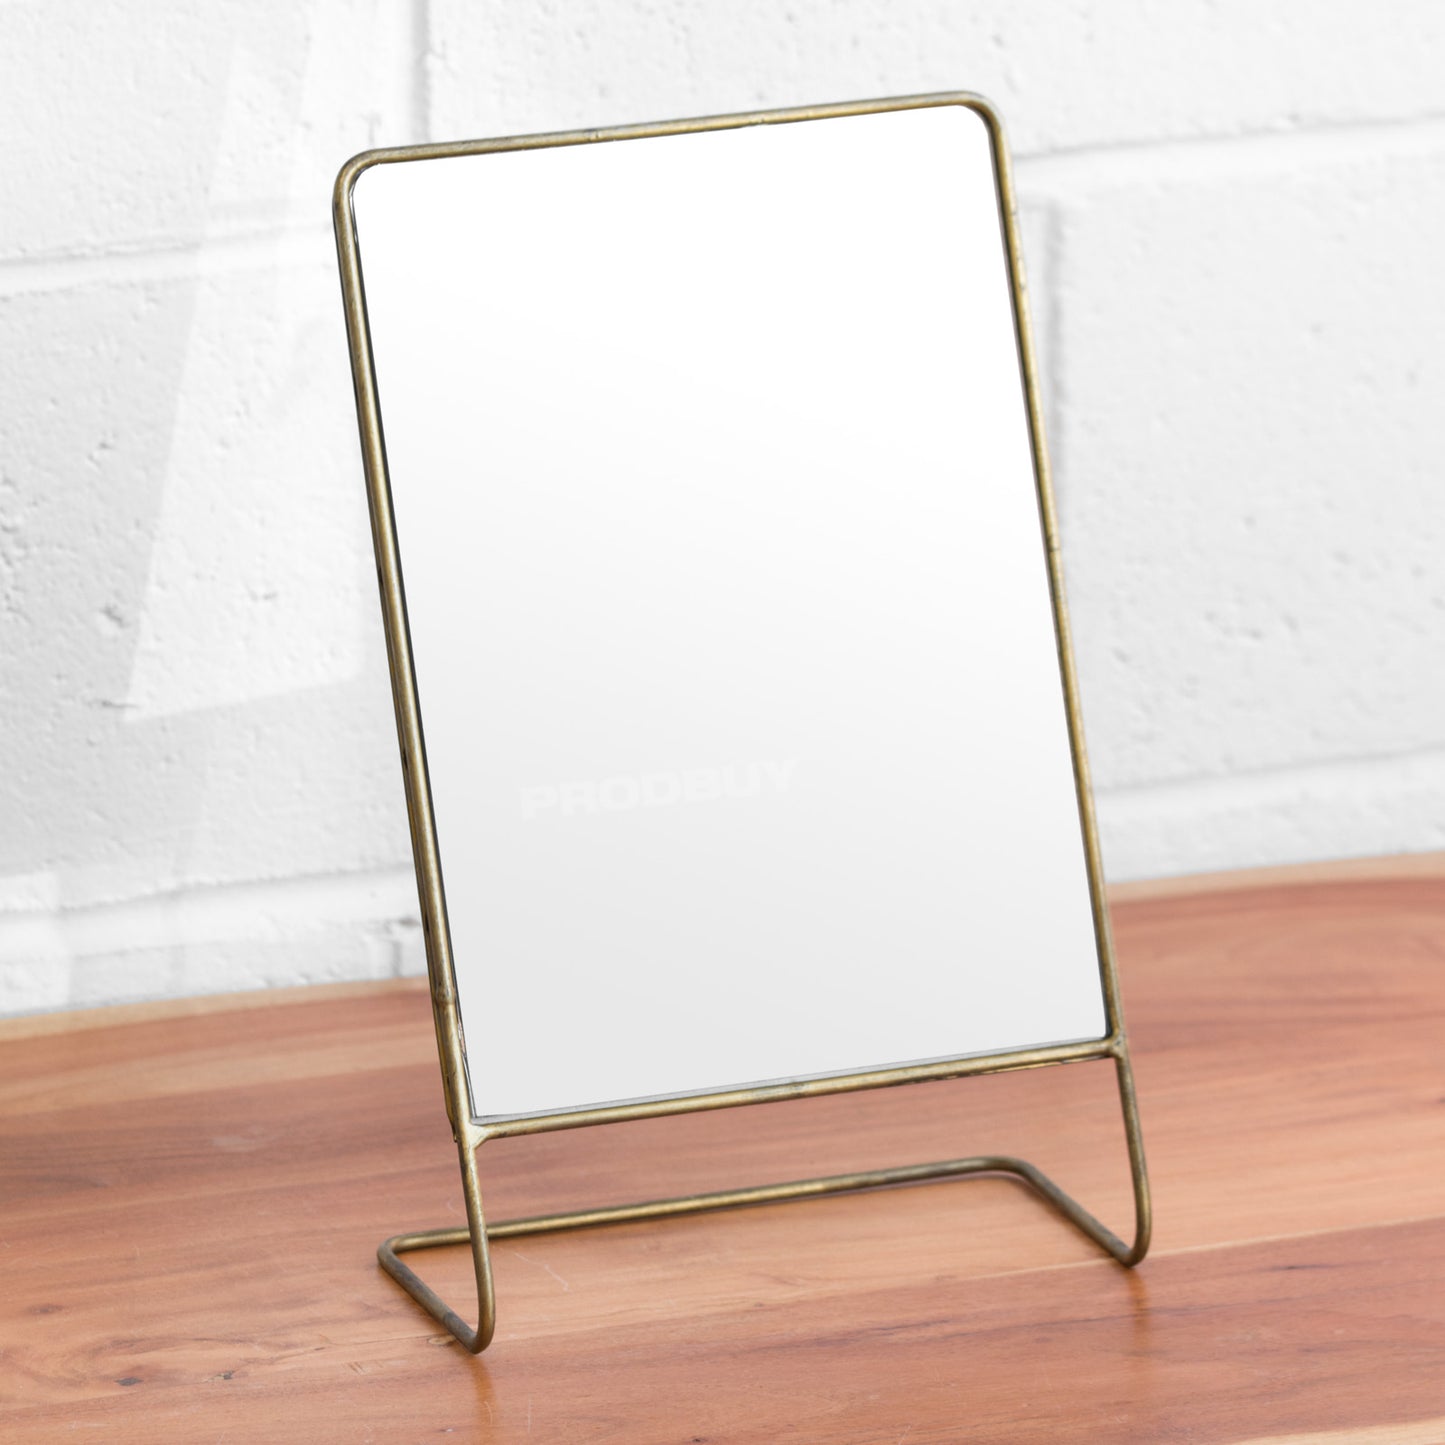 Vintage Style Gold Frame Table Top Mirror